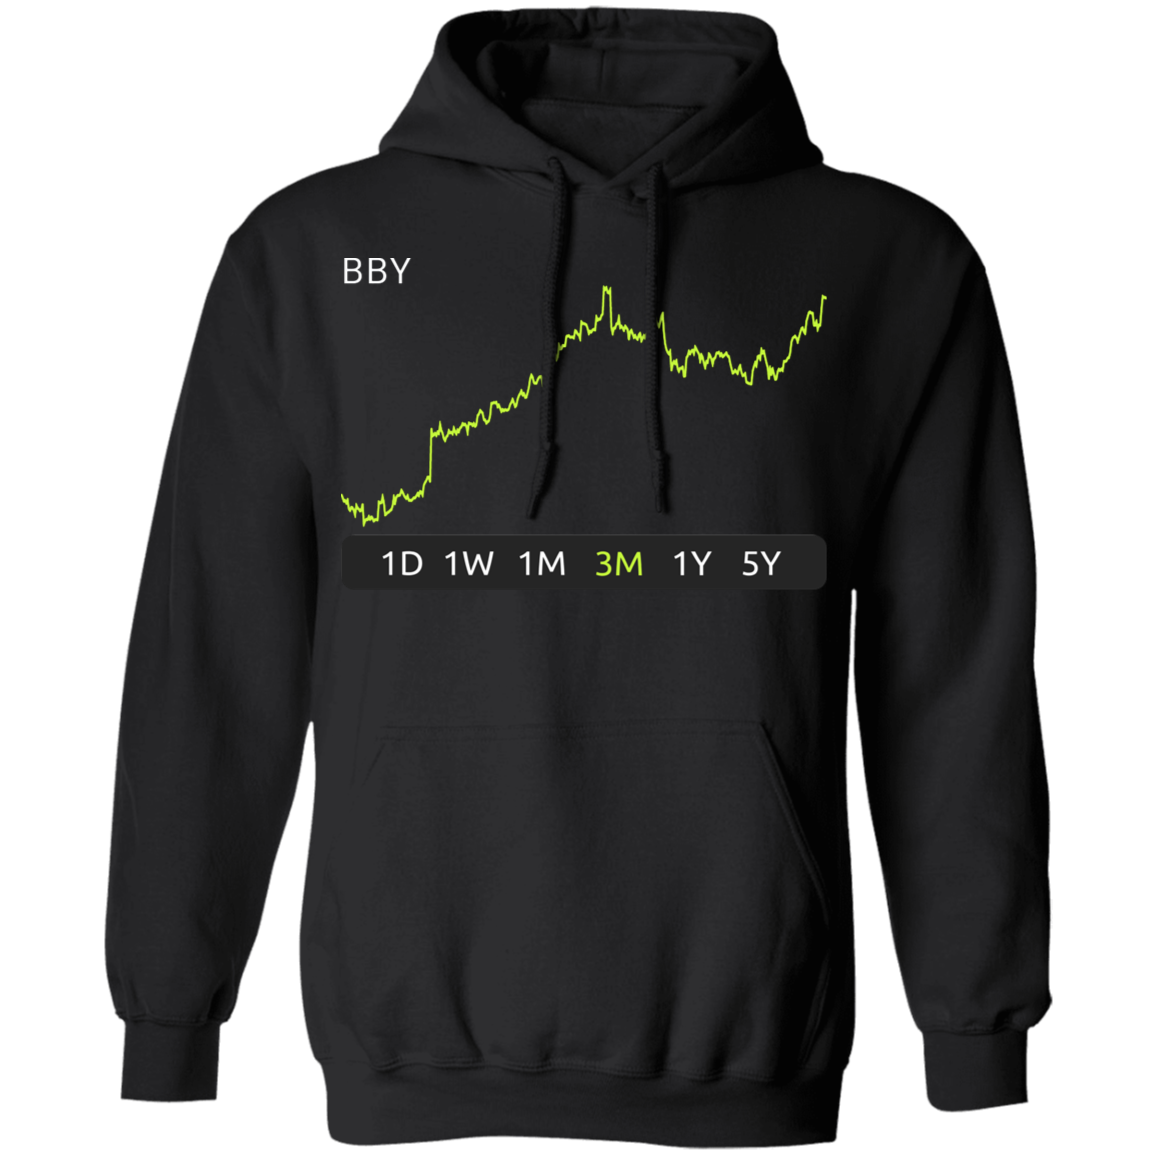 BBY Stock 3m Pullover Hoodie